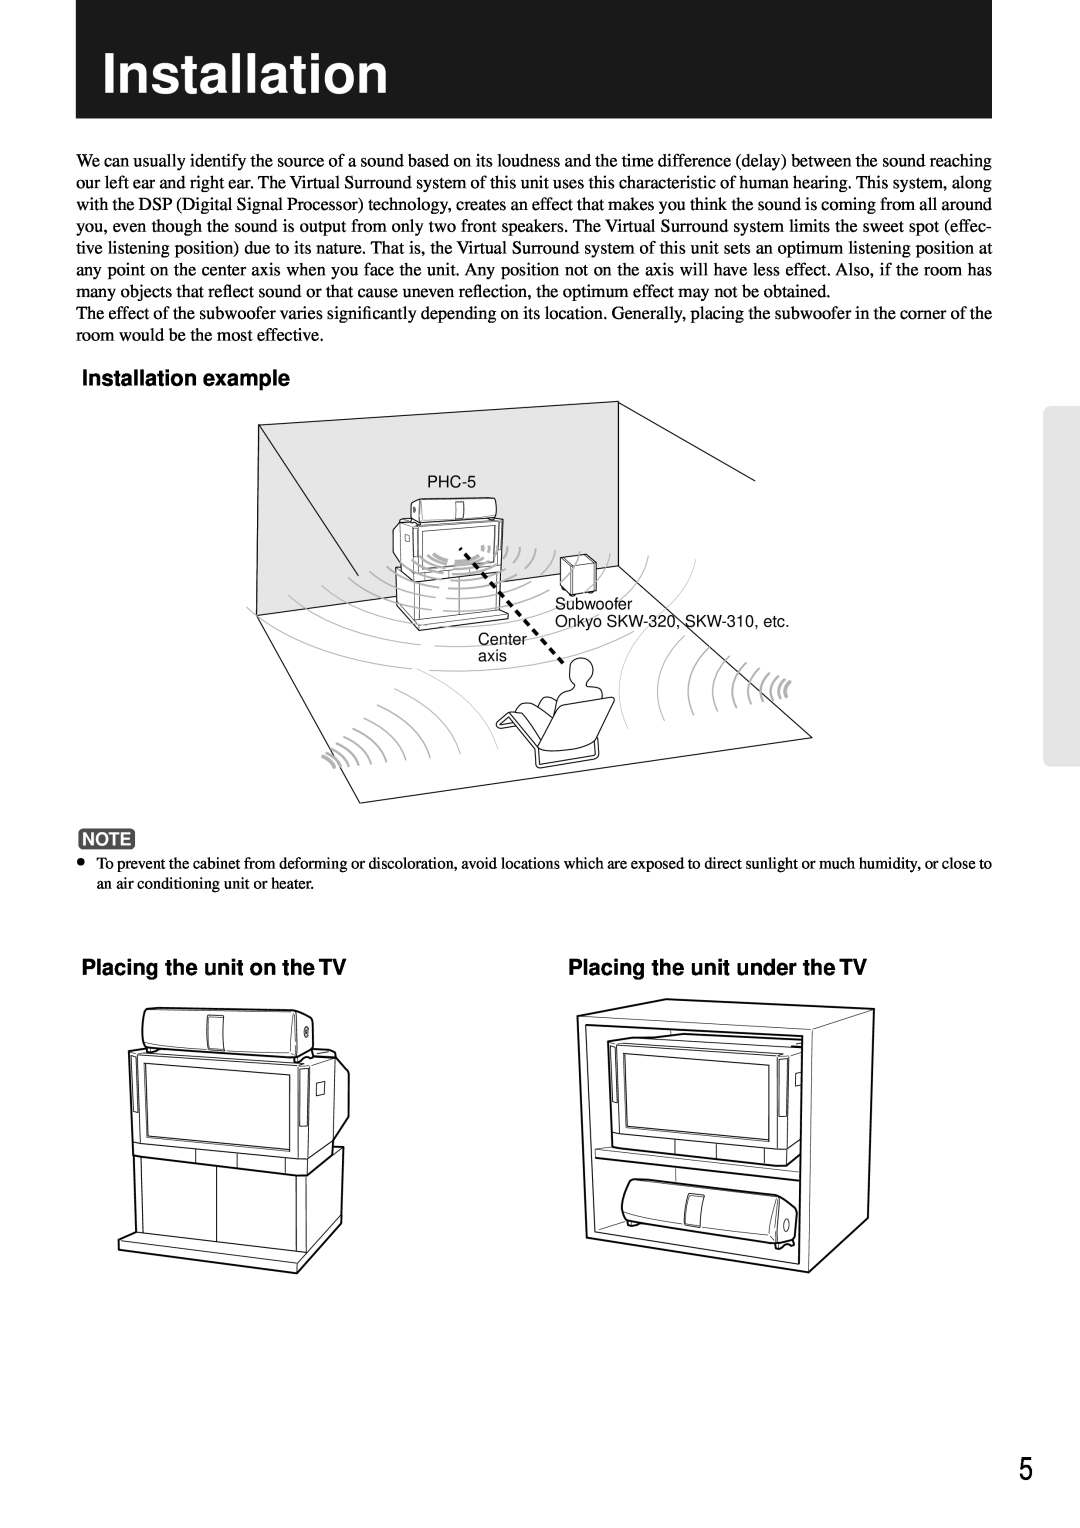 Onkyo PHC-5 instruction manual Installation example, Placing the unit on the TV, Placing the unit under the TV 